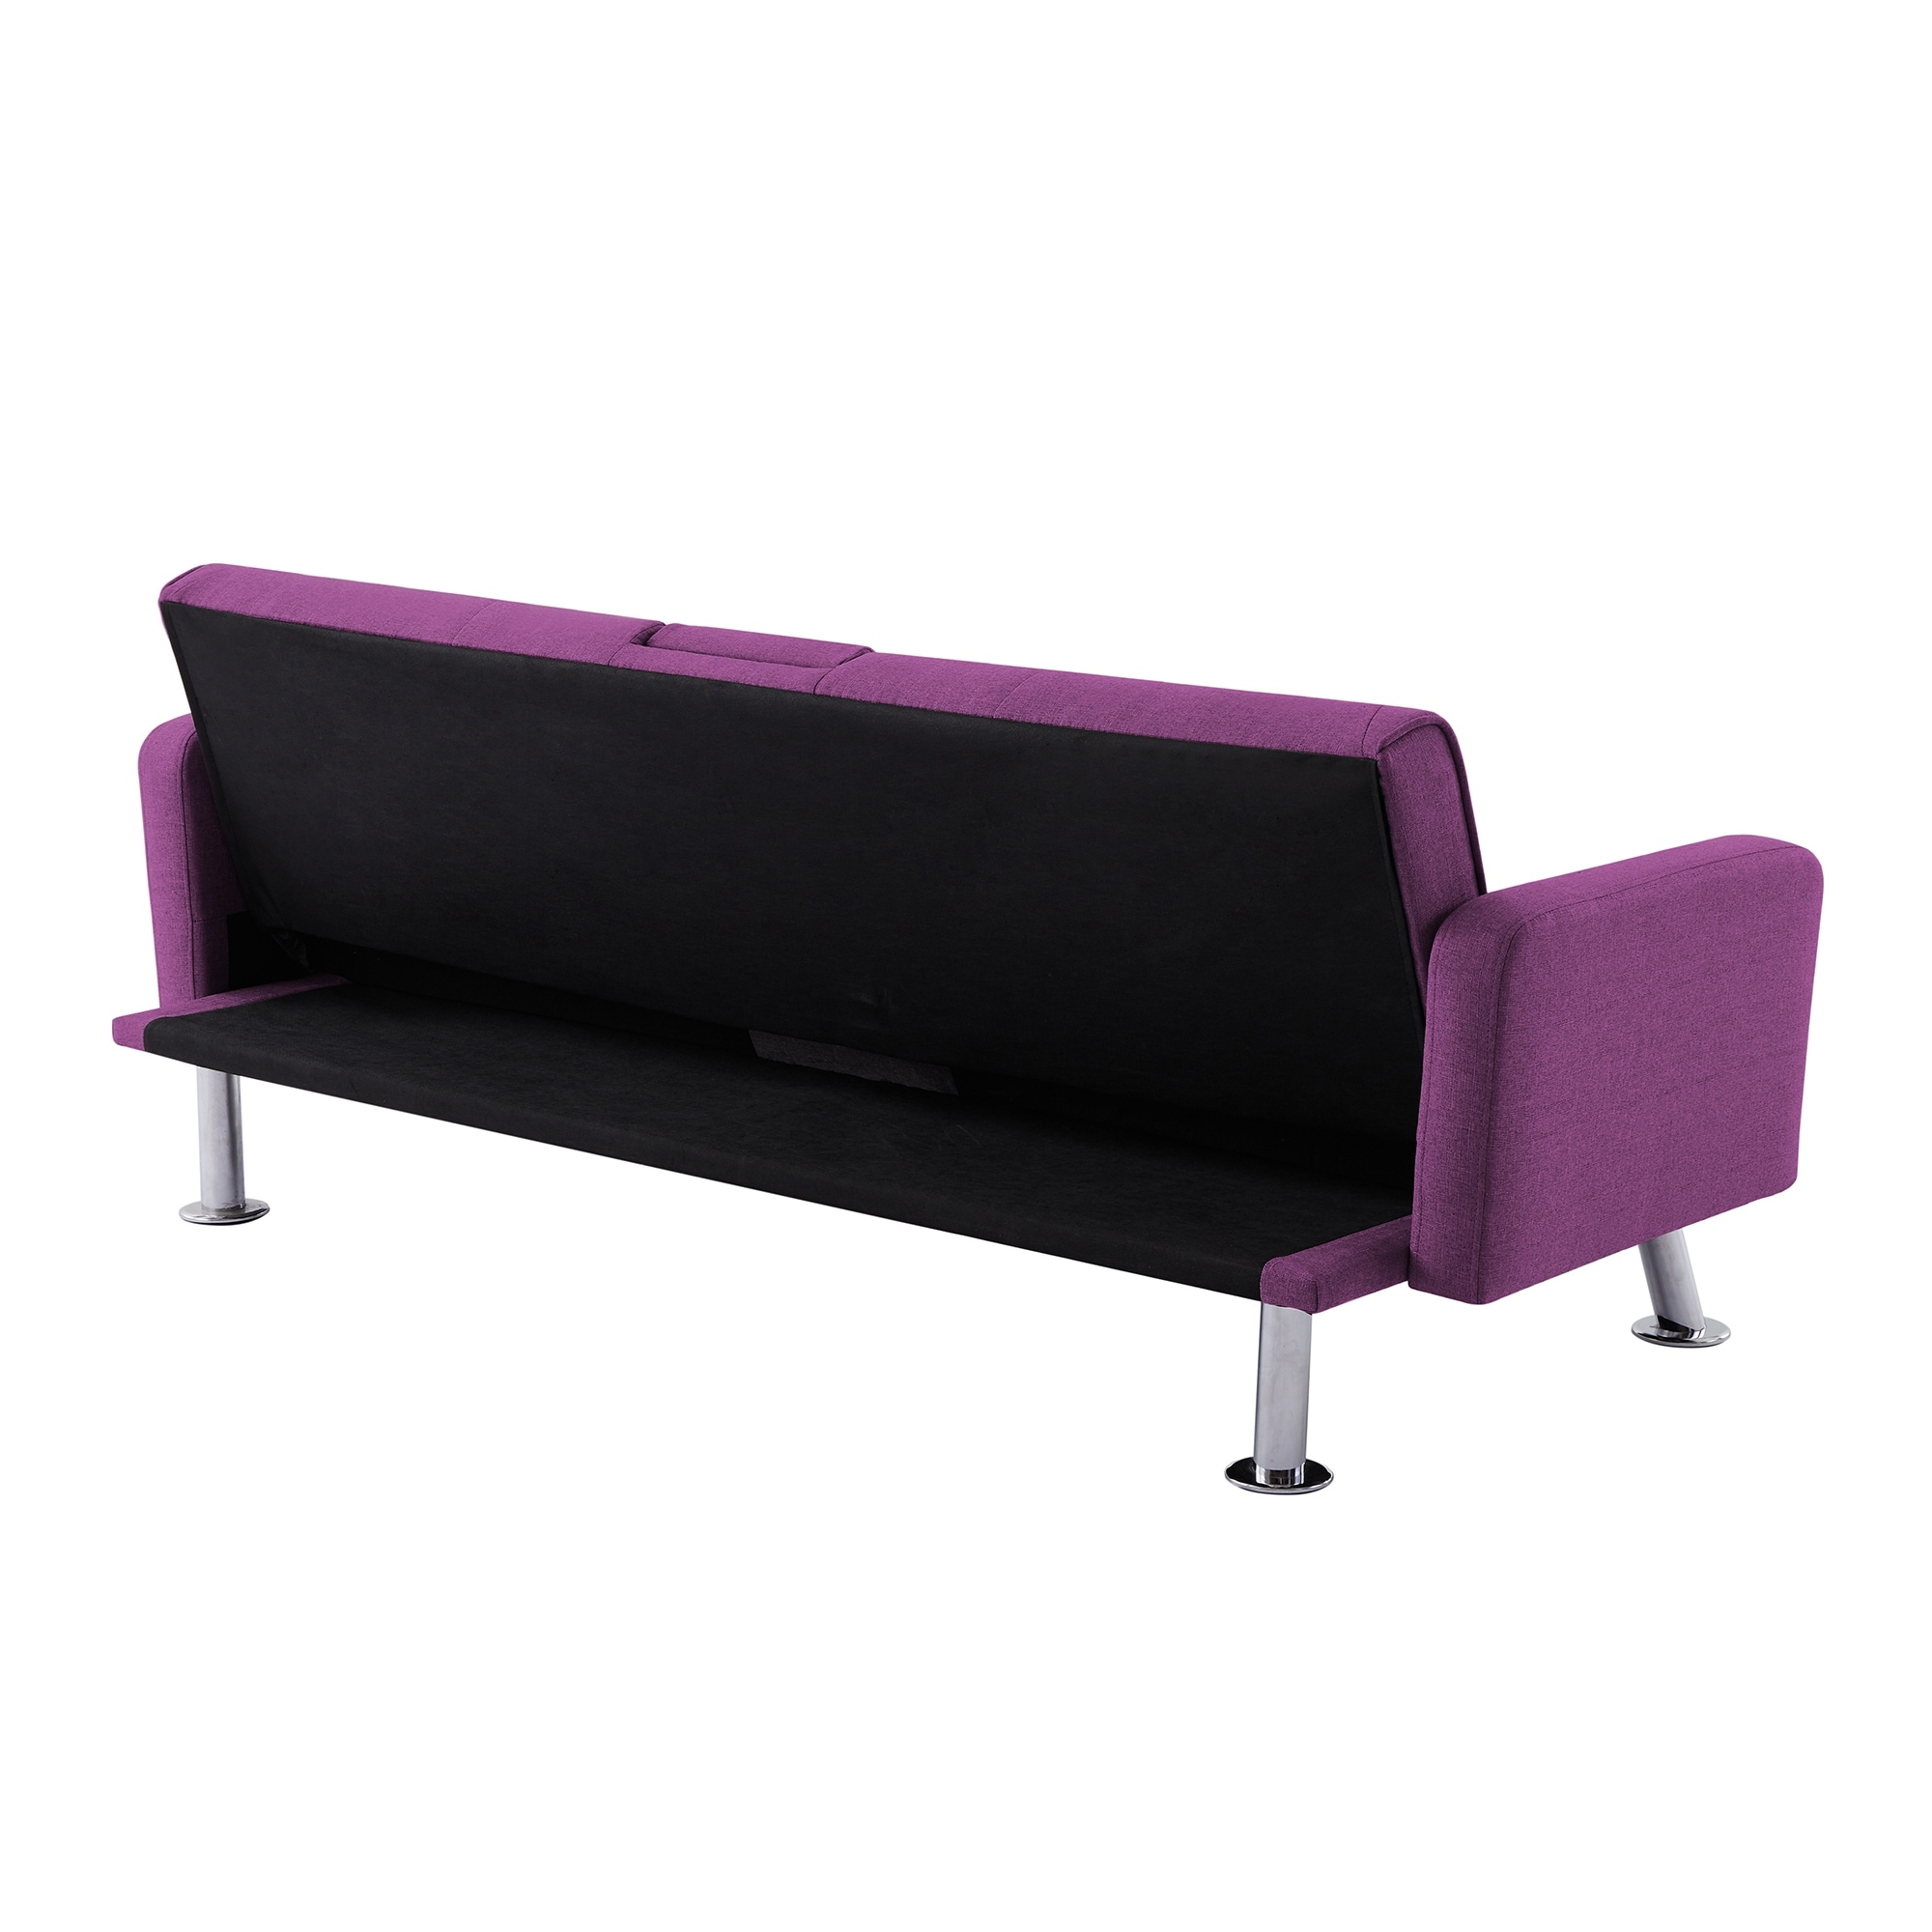 Convertible Folding Sleeper Sofa Couch for Living Room - Purple